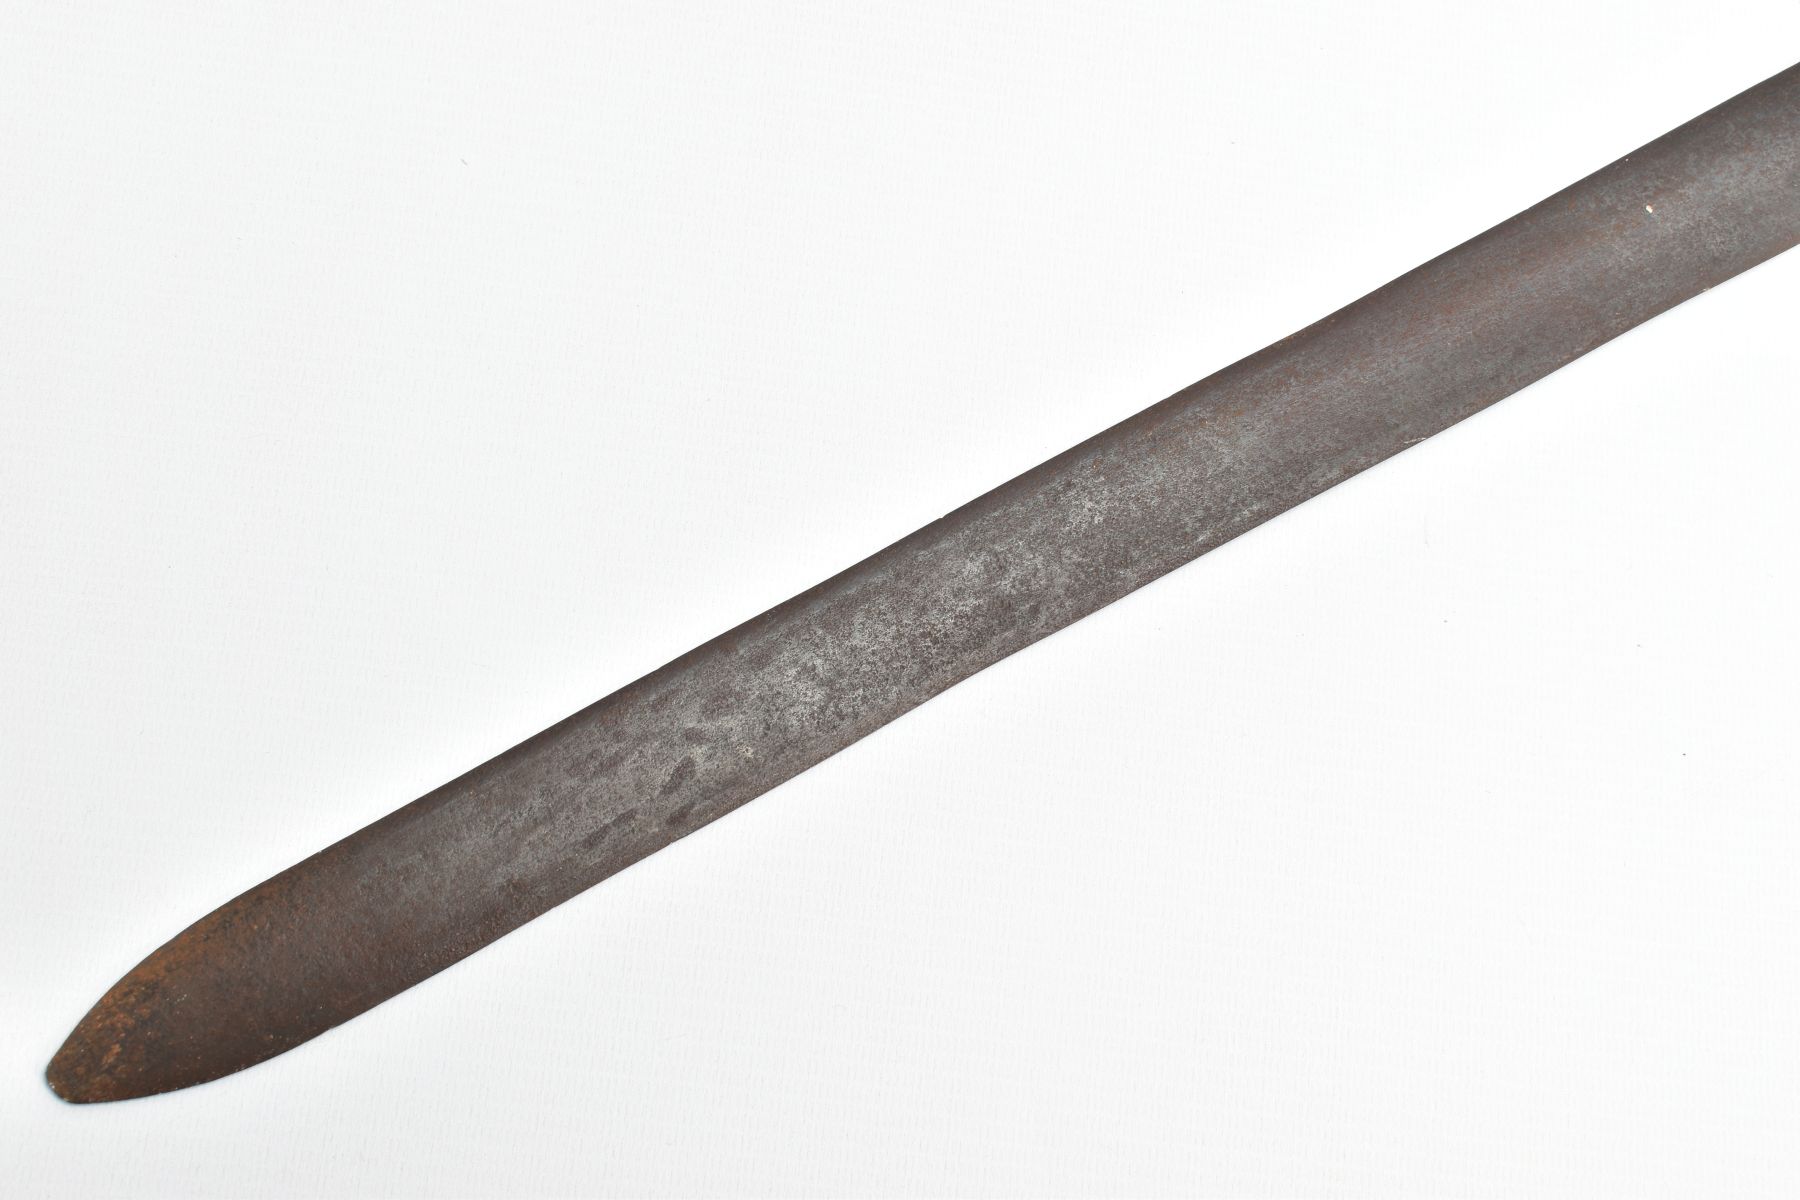 A MEDIEVAL STYLE SWORD, POSSIBLY EUROPEAN IN MANUFACTURE IN THE KASKARAS STYLE, the blade is - Image 13 of 13